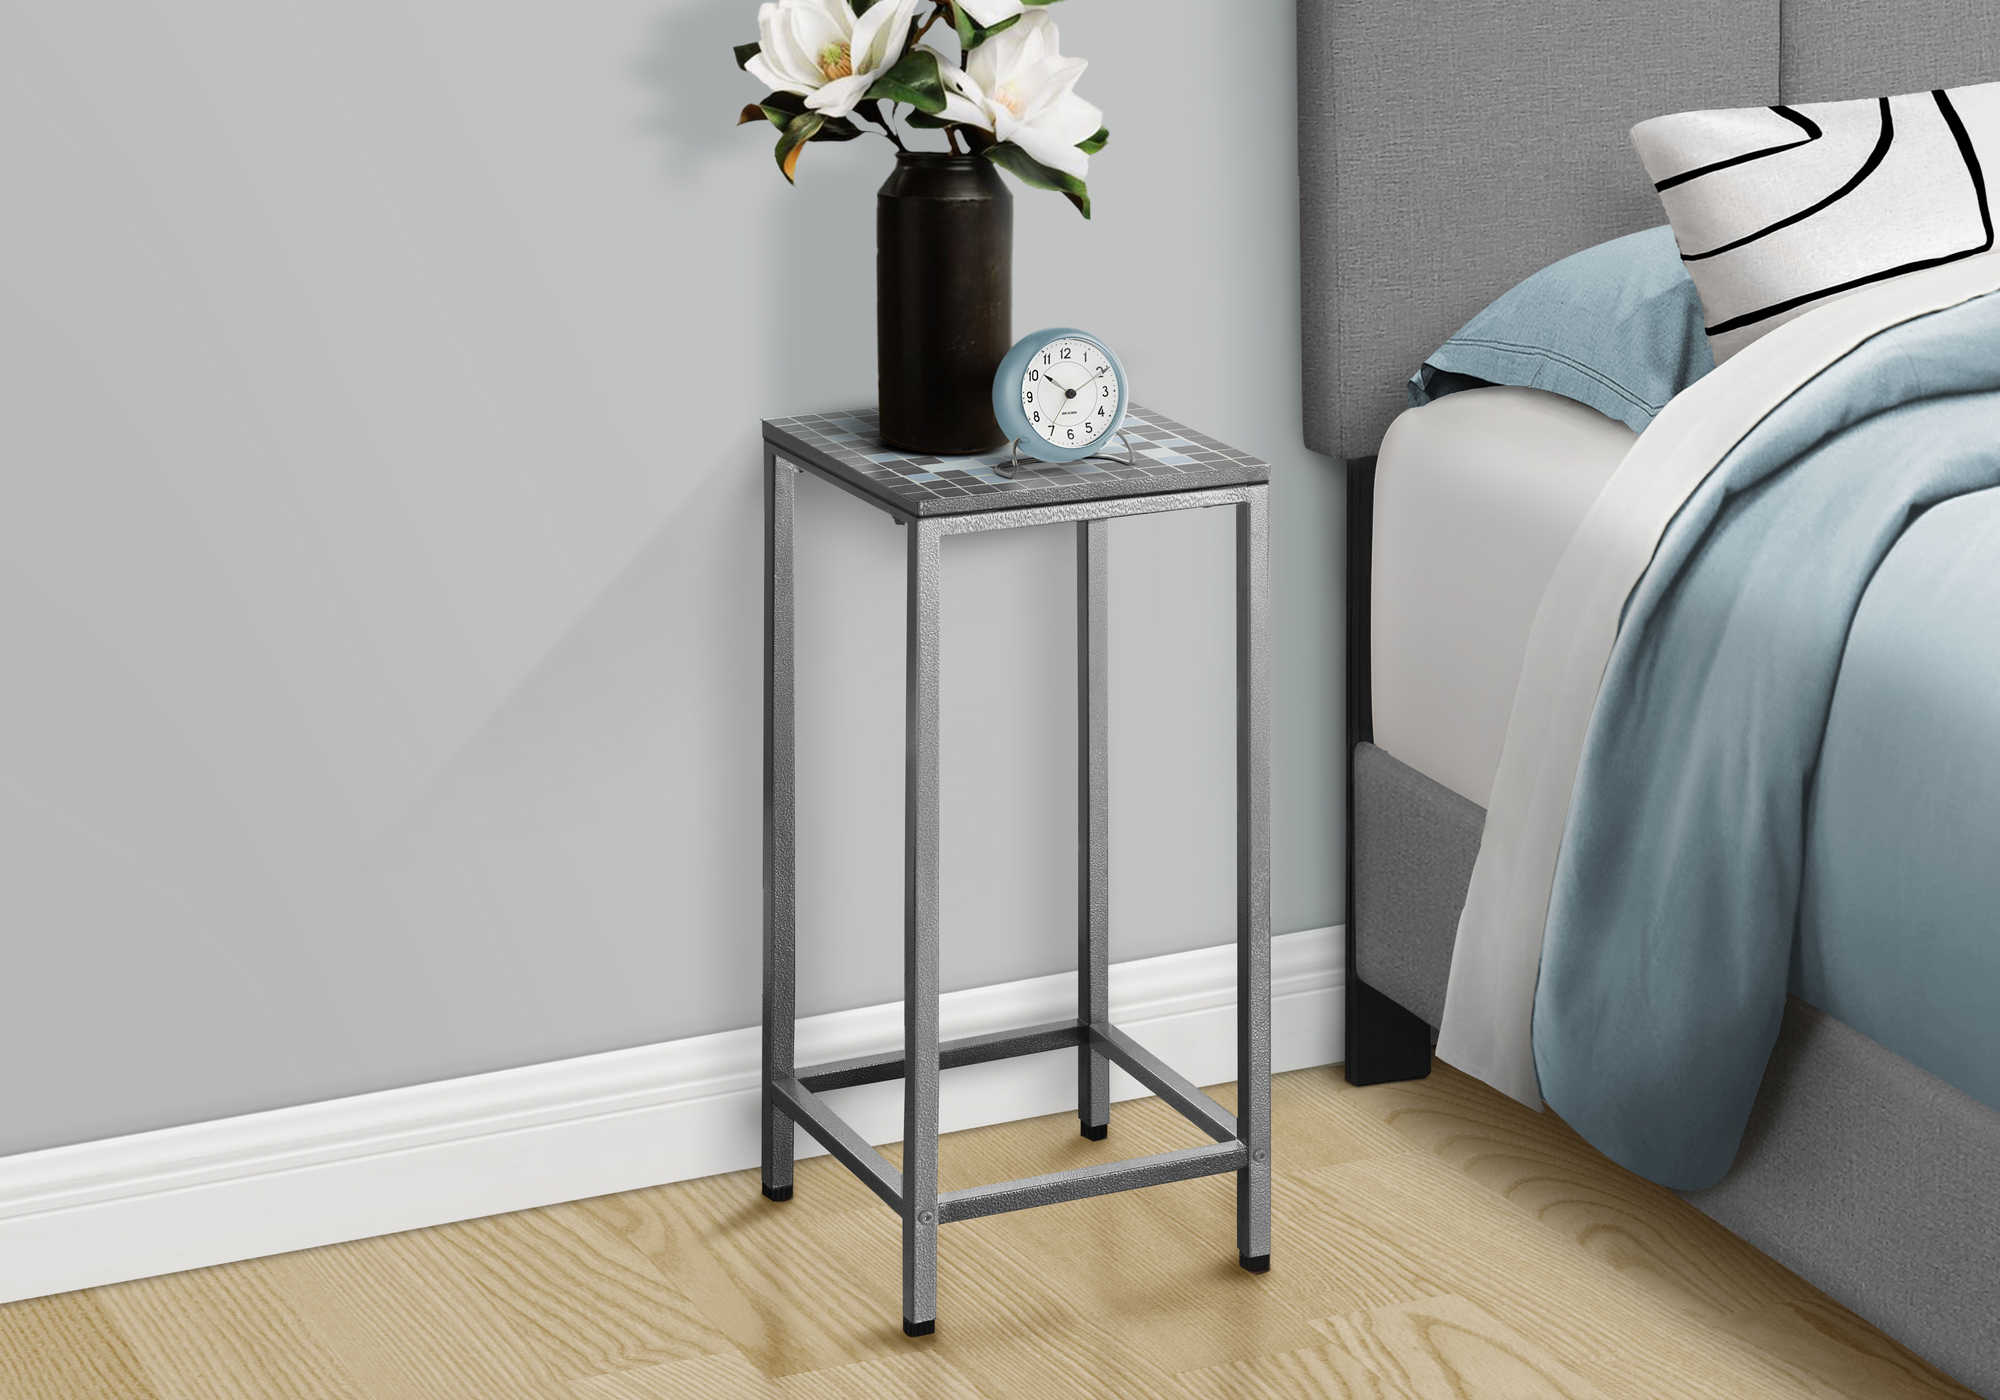 NIGHTSTAND - GREY / BLUE TILE TOP / HAMMERED SILVER